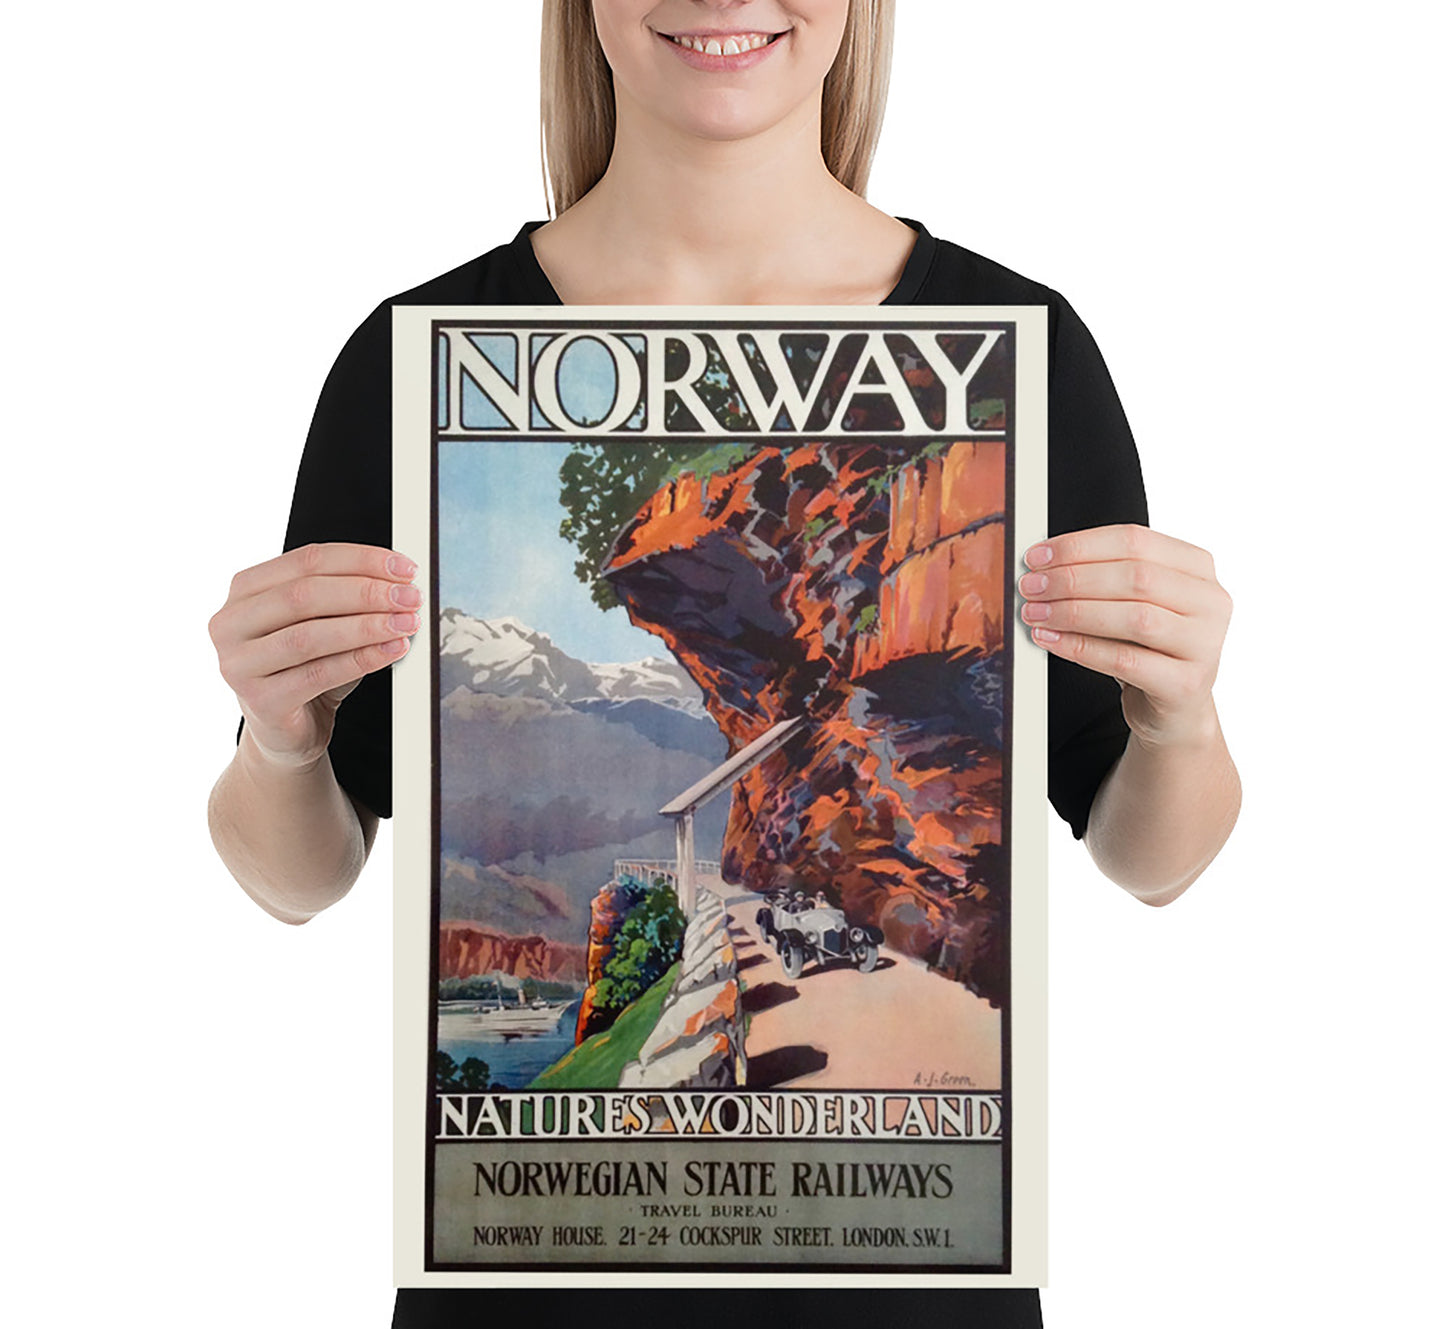 Natures wonderland, Norway vintage travel poster by unknown author, 1930s.